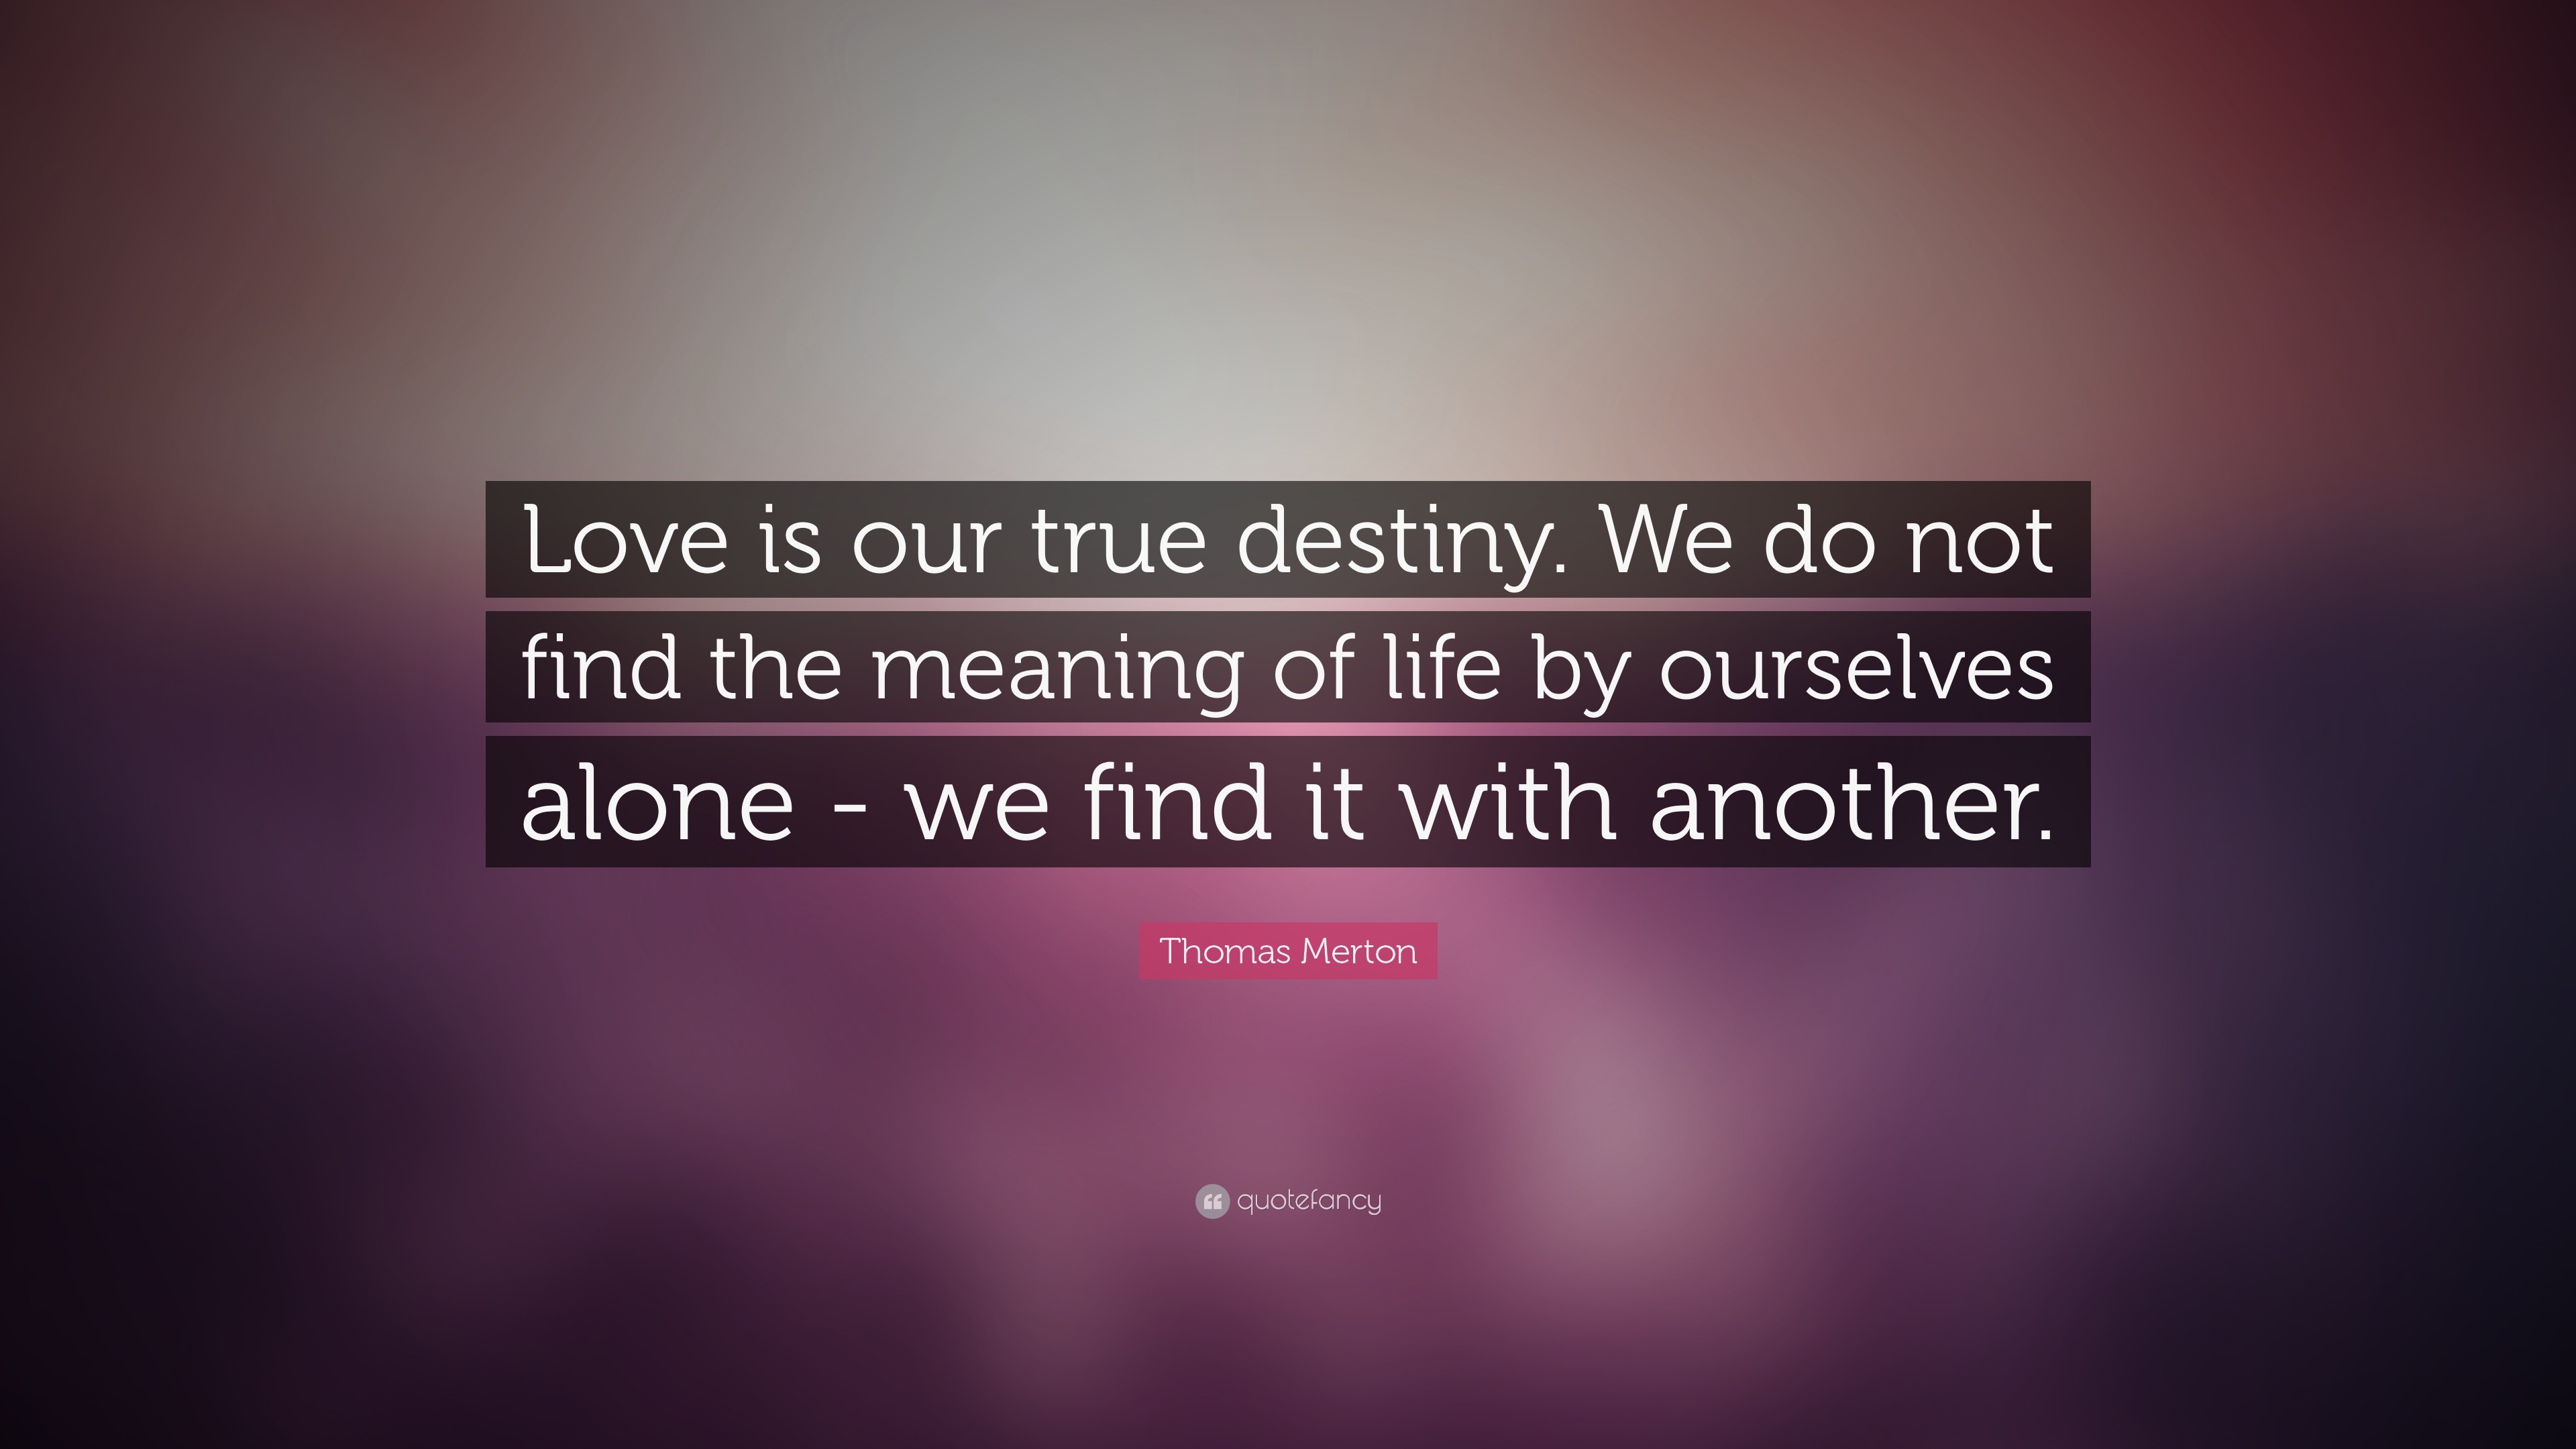 Fate Quotes “Love is our true destiny We do not find the meaning